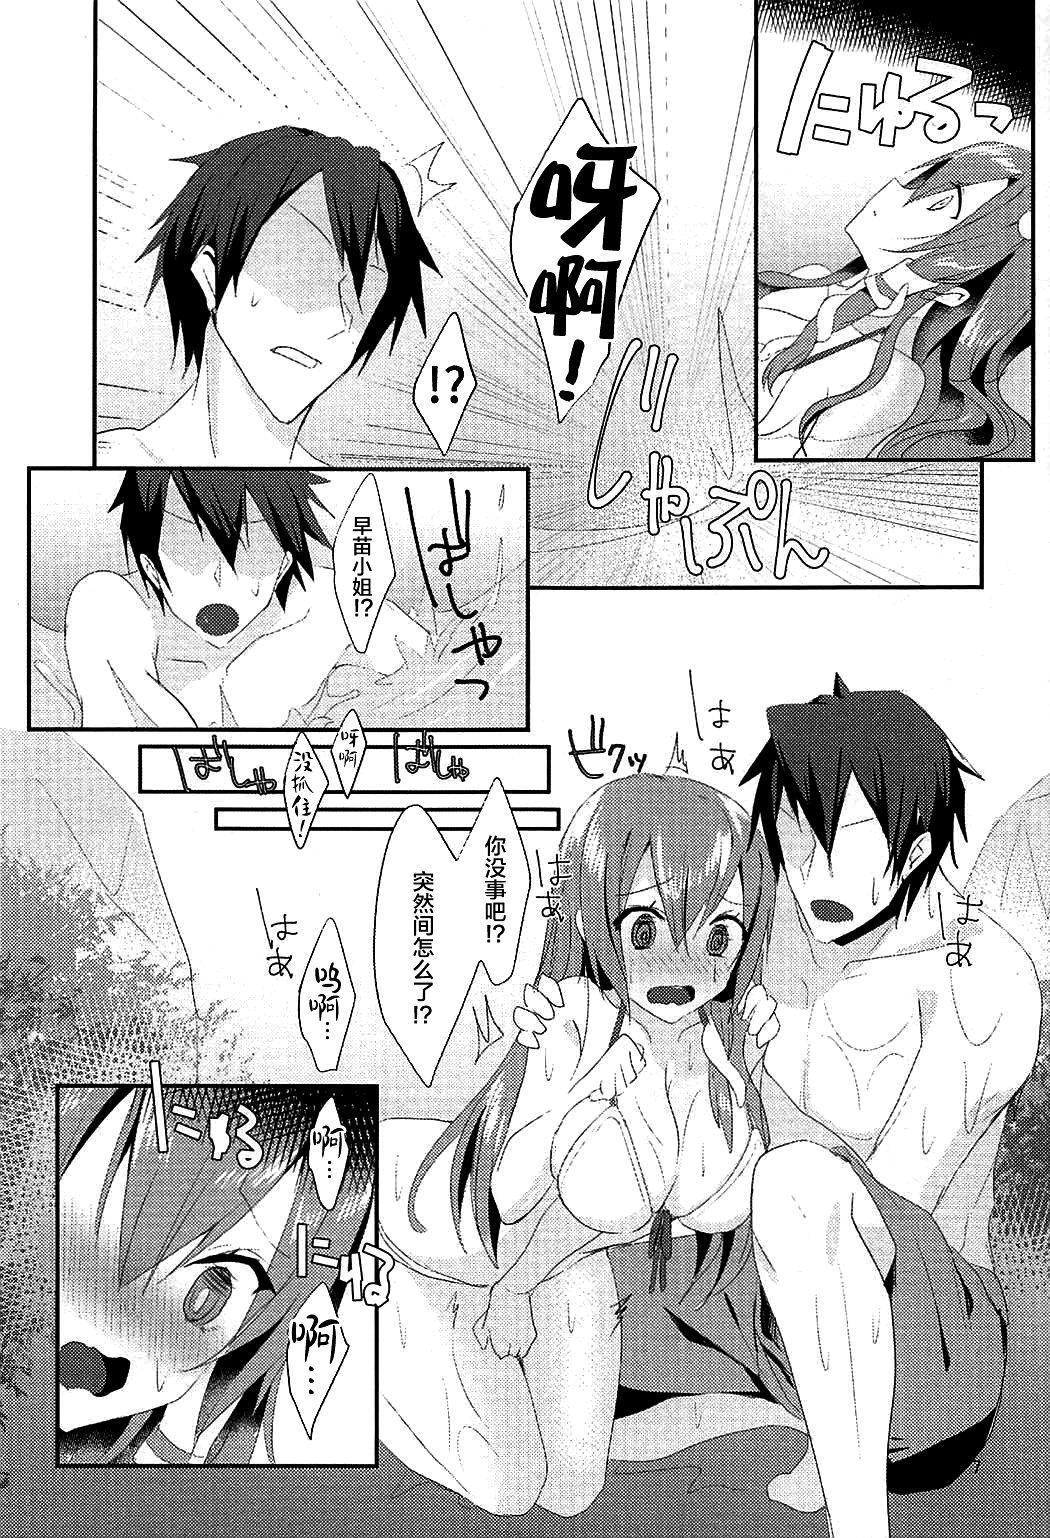 Gayemo Sonna Tokoro Haiccha Dame! - Touhou project Naked Sex - Page 6